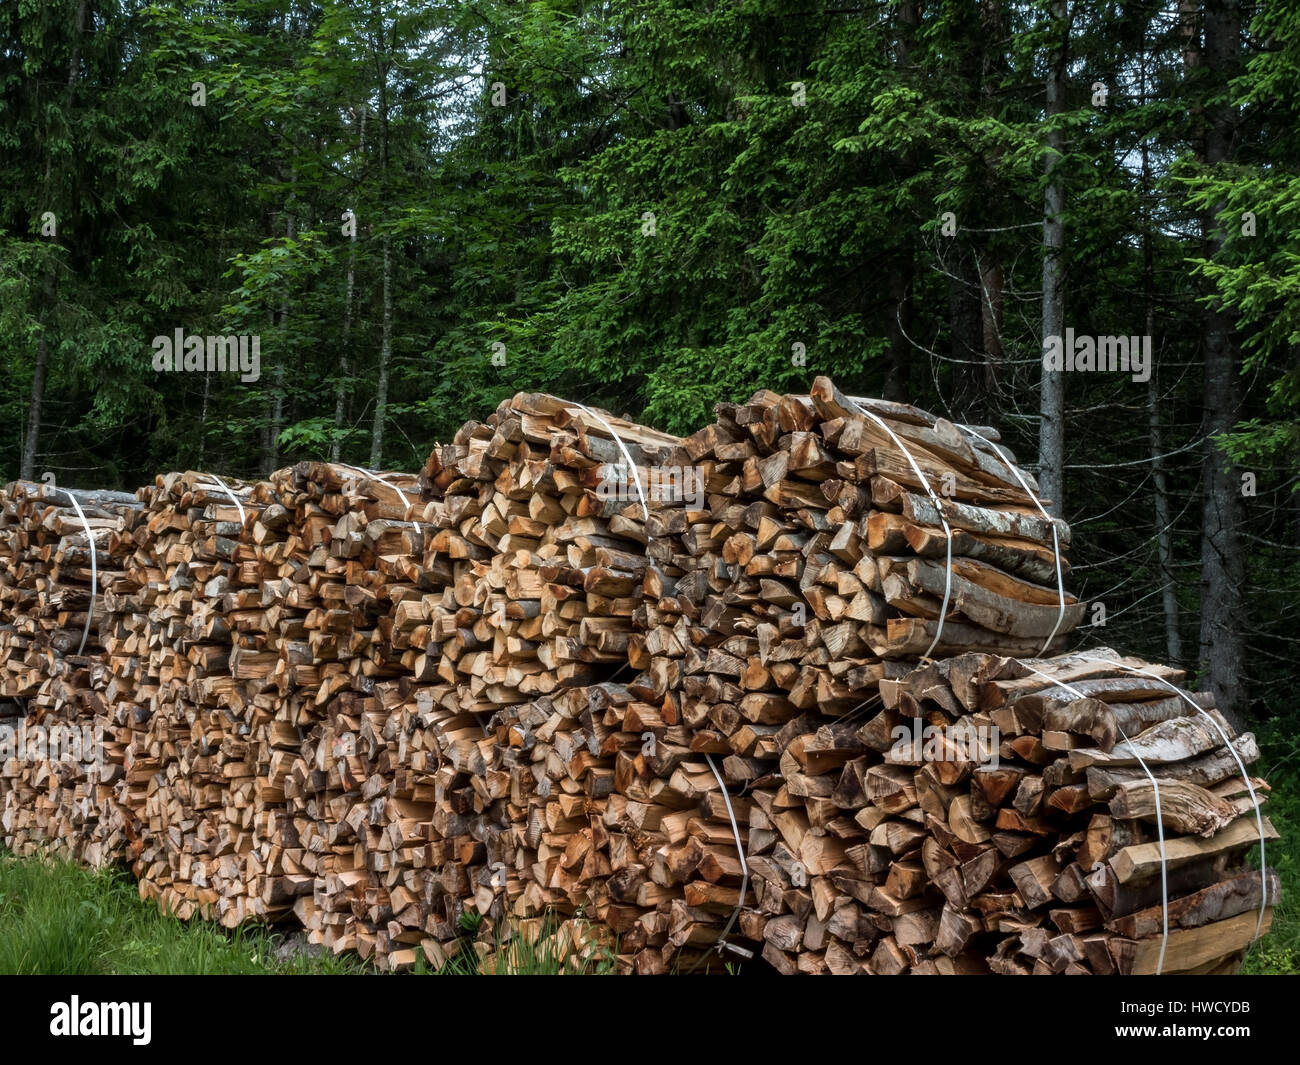 Stacked up wood as a firewood for the winter, Aufgestapeltes Holz als Brennholz für den Winter Stock Photo